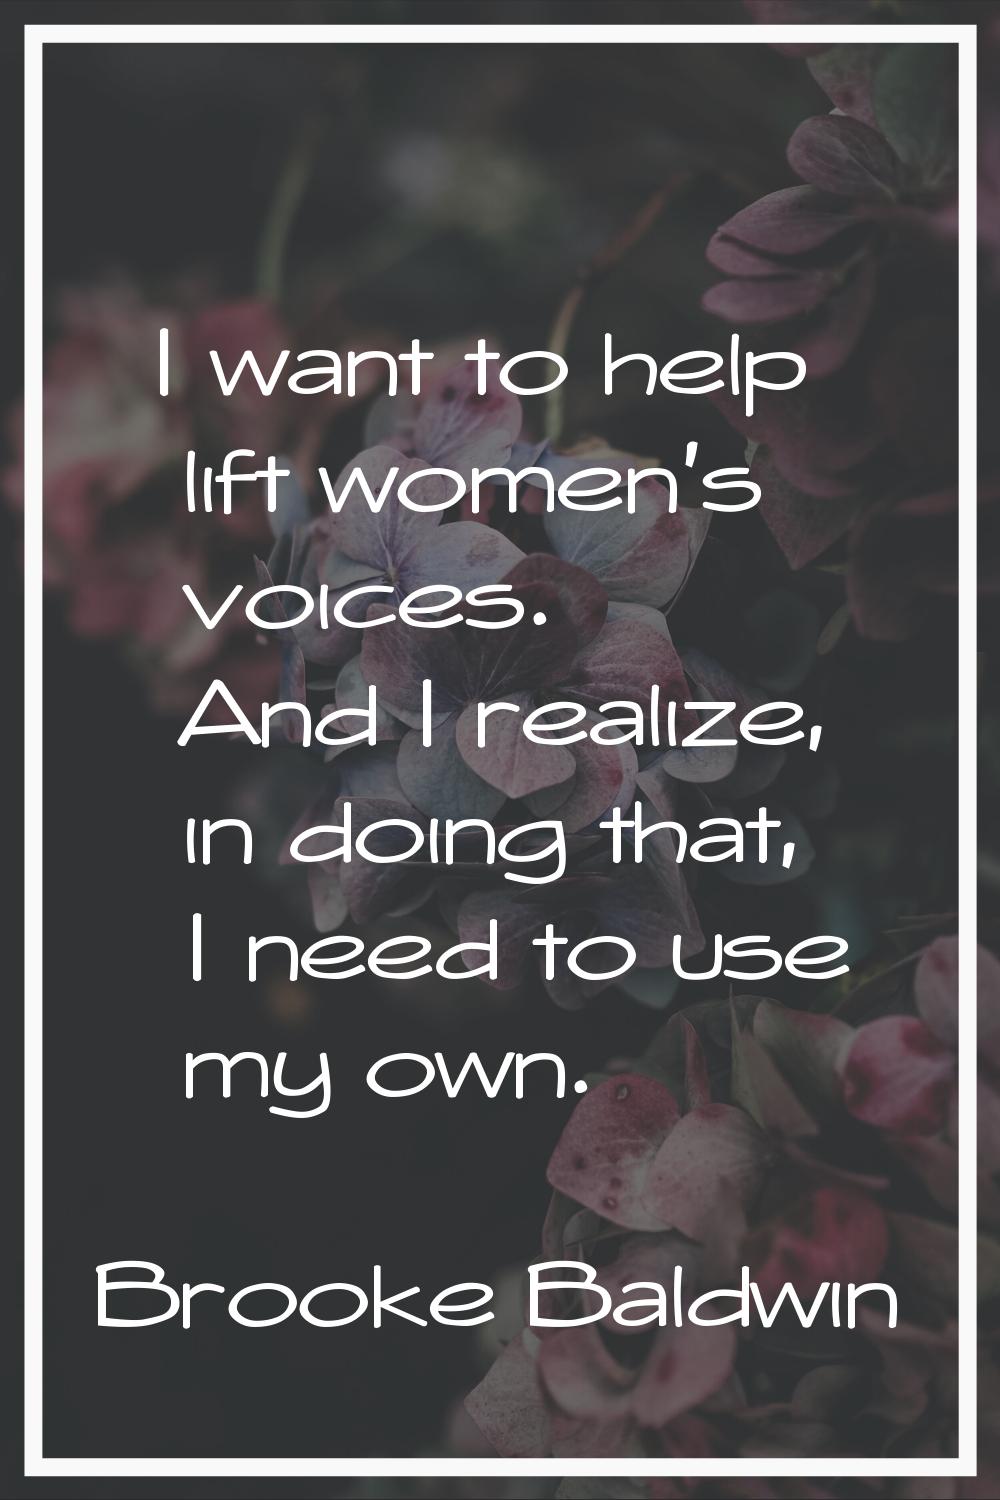 I want to help lift women's voices. And I realize, in doing that, I need to use my own.